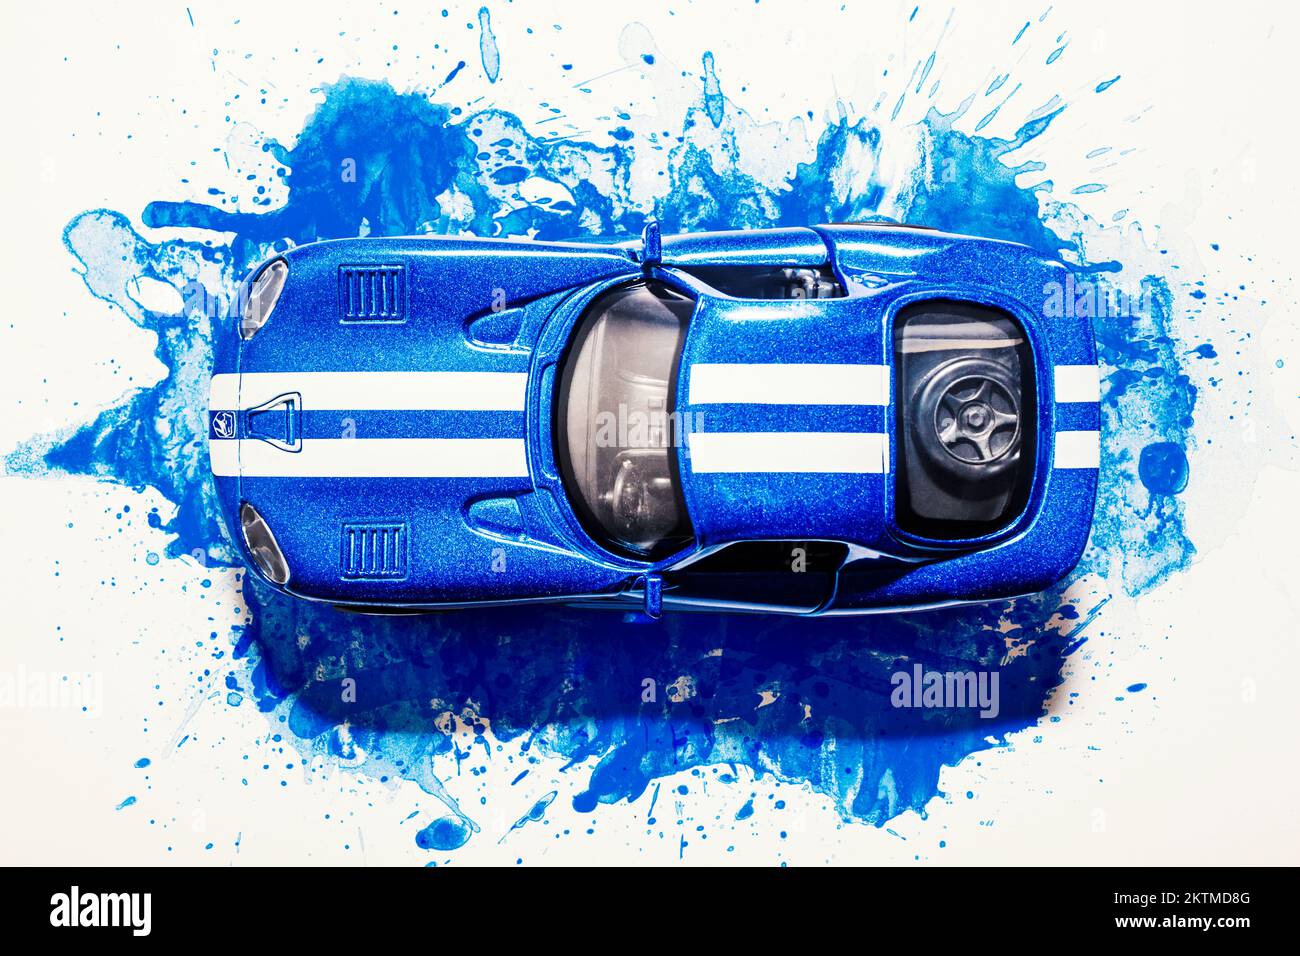 Fine art photo on a mould breaking design in graphic automotive fluidity. Dodge Viper GTS Stock Photo